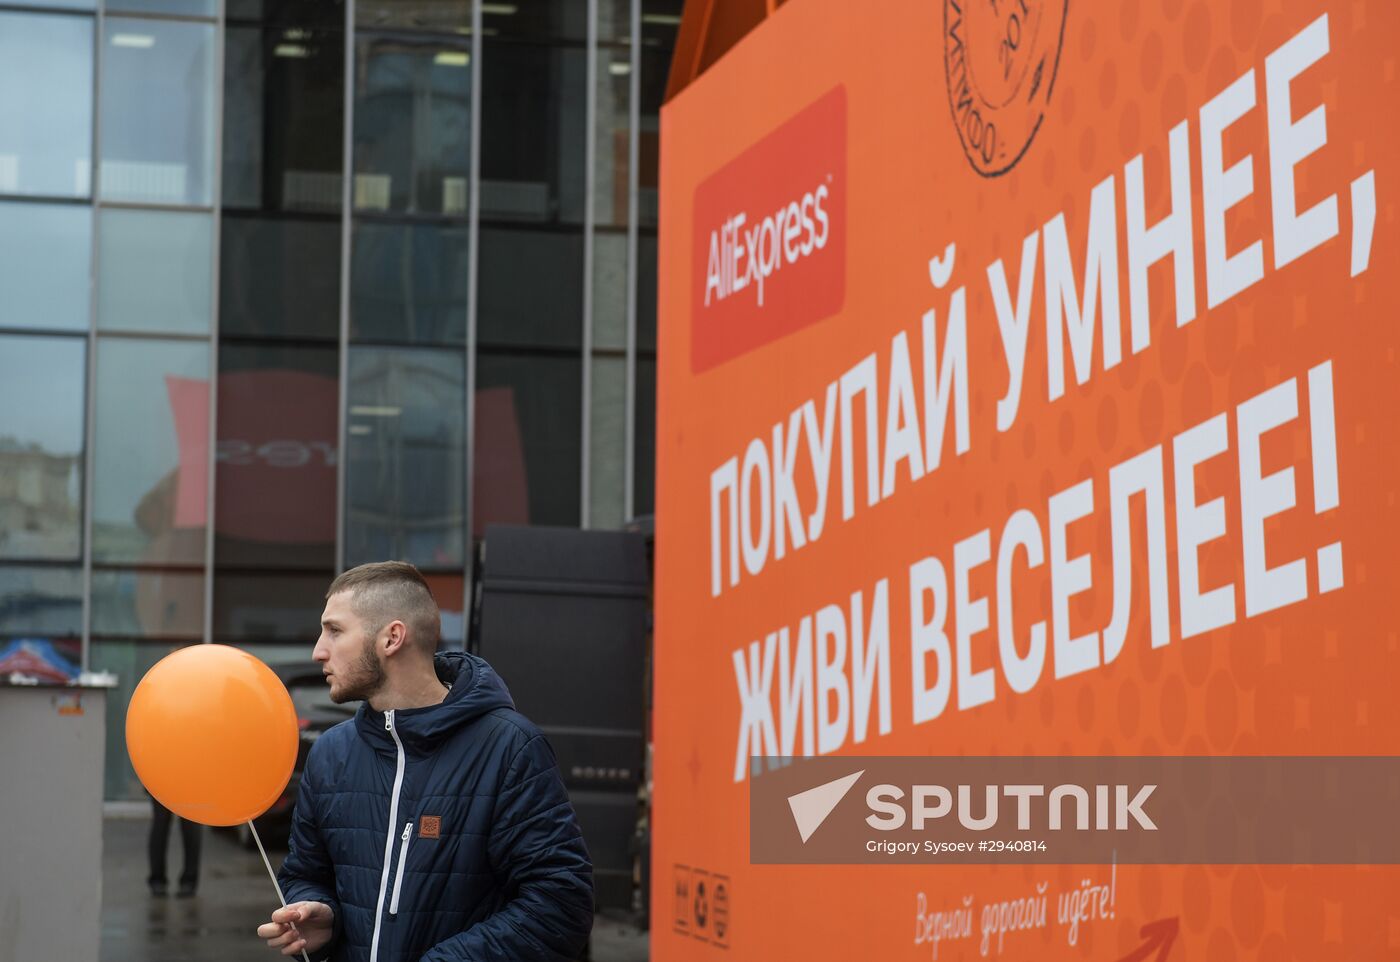 First AliExpress show-room opens in Moscow